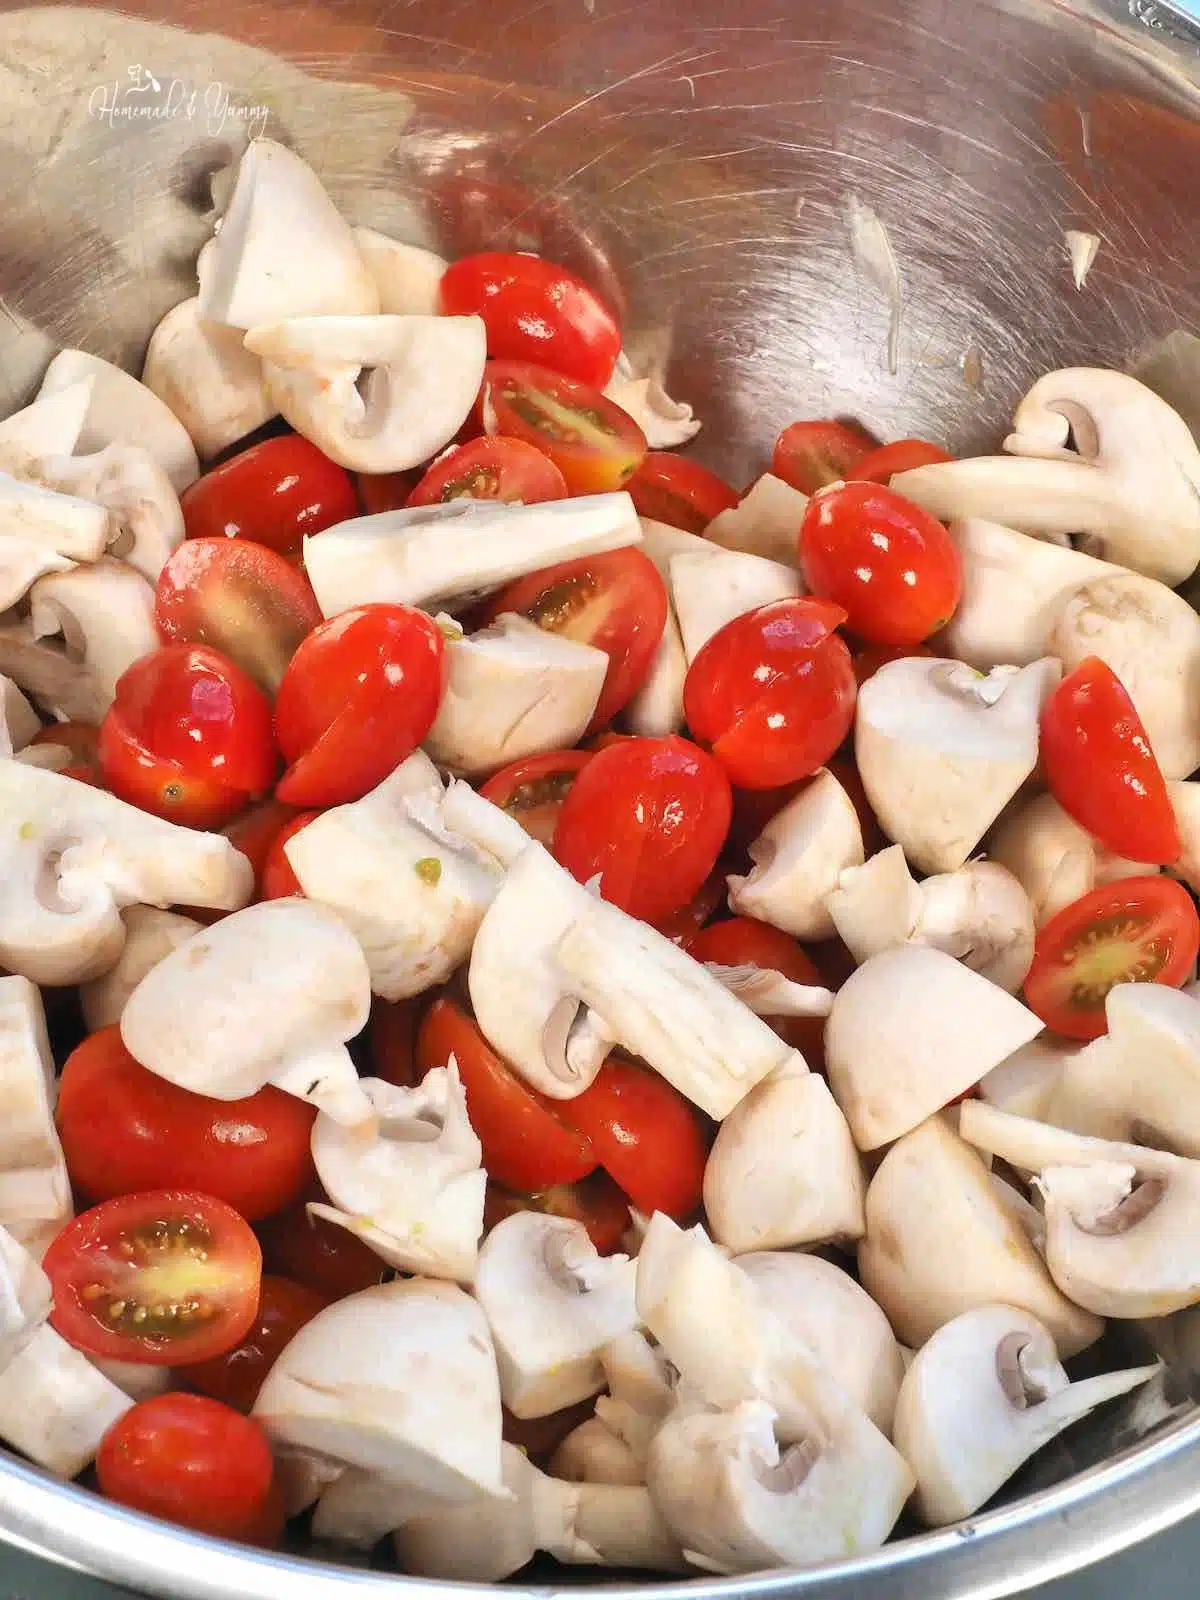 Cut up mushrooms and tomatoes in a bowl.